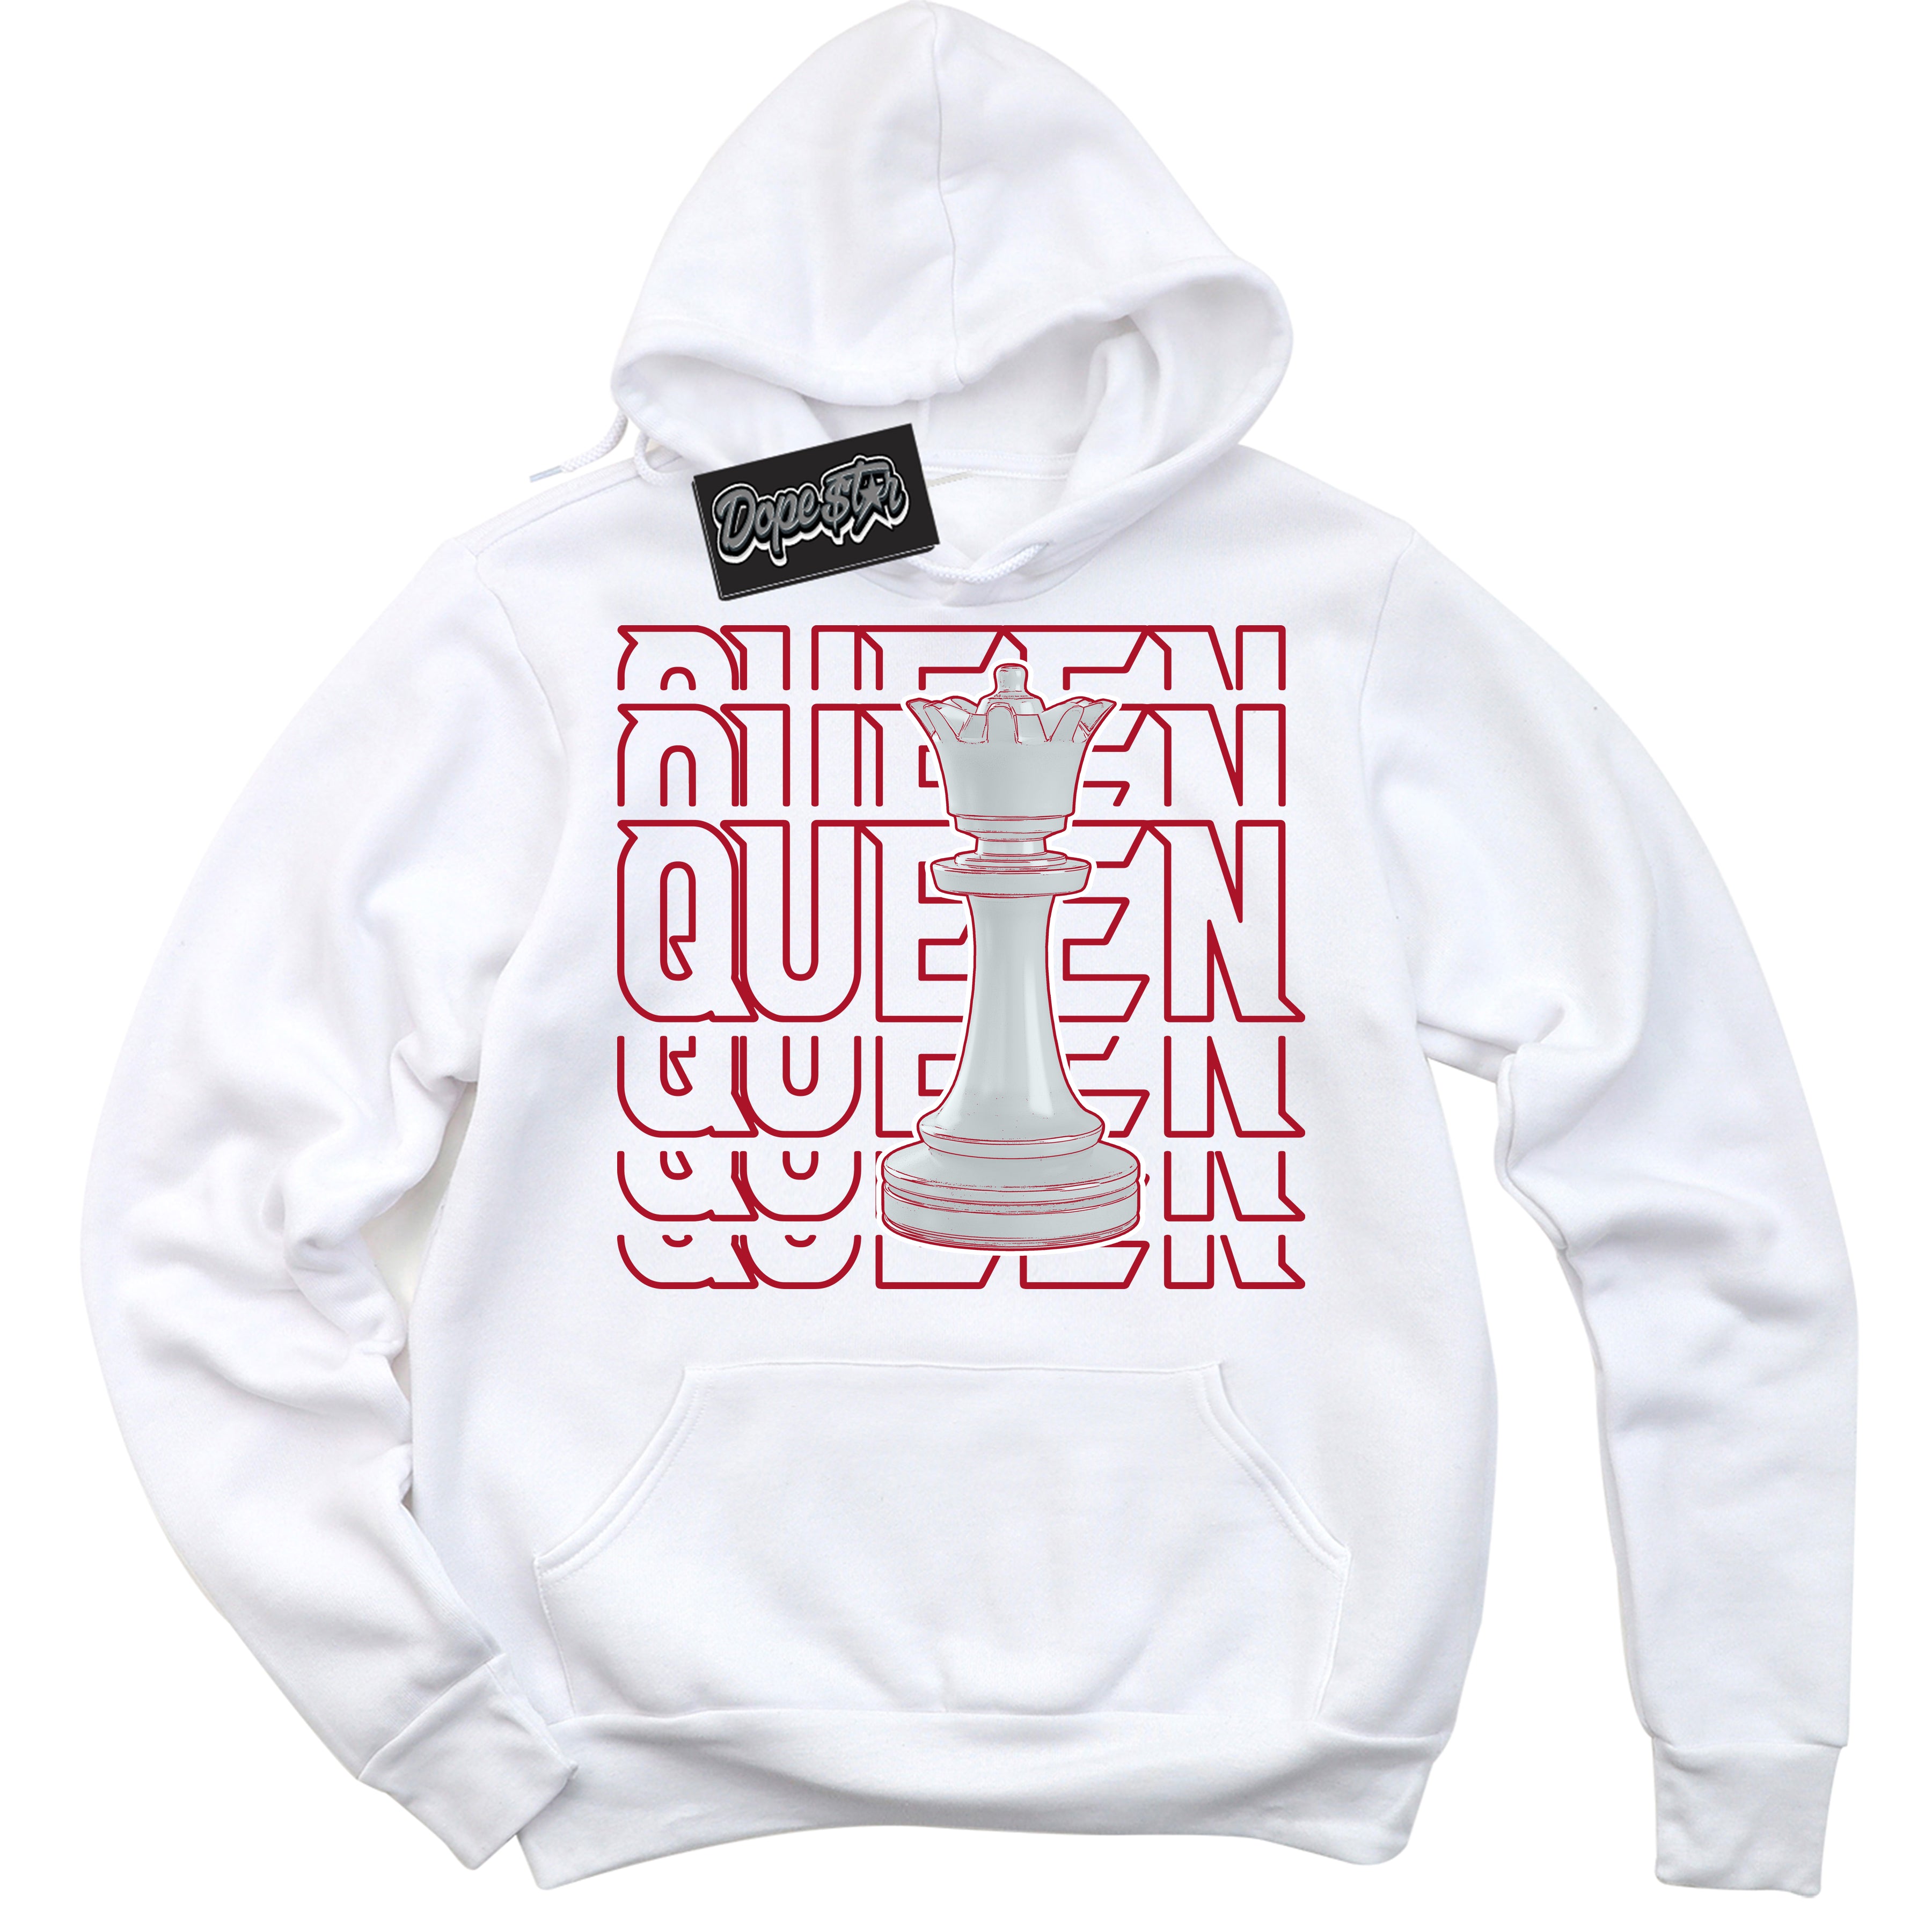 Cool White Hoodie with “ Queen Chess ”  design that Perfectly Matches Reverse Ultraman Sneakers.